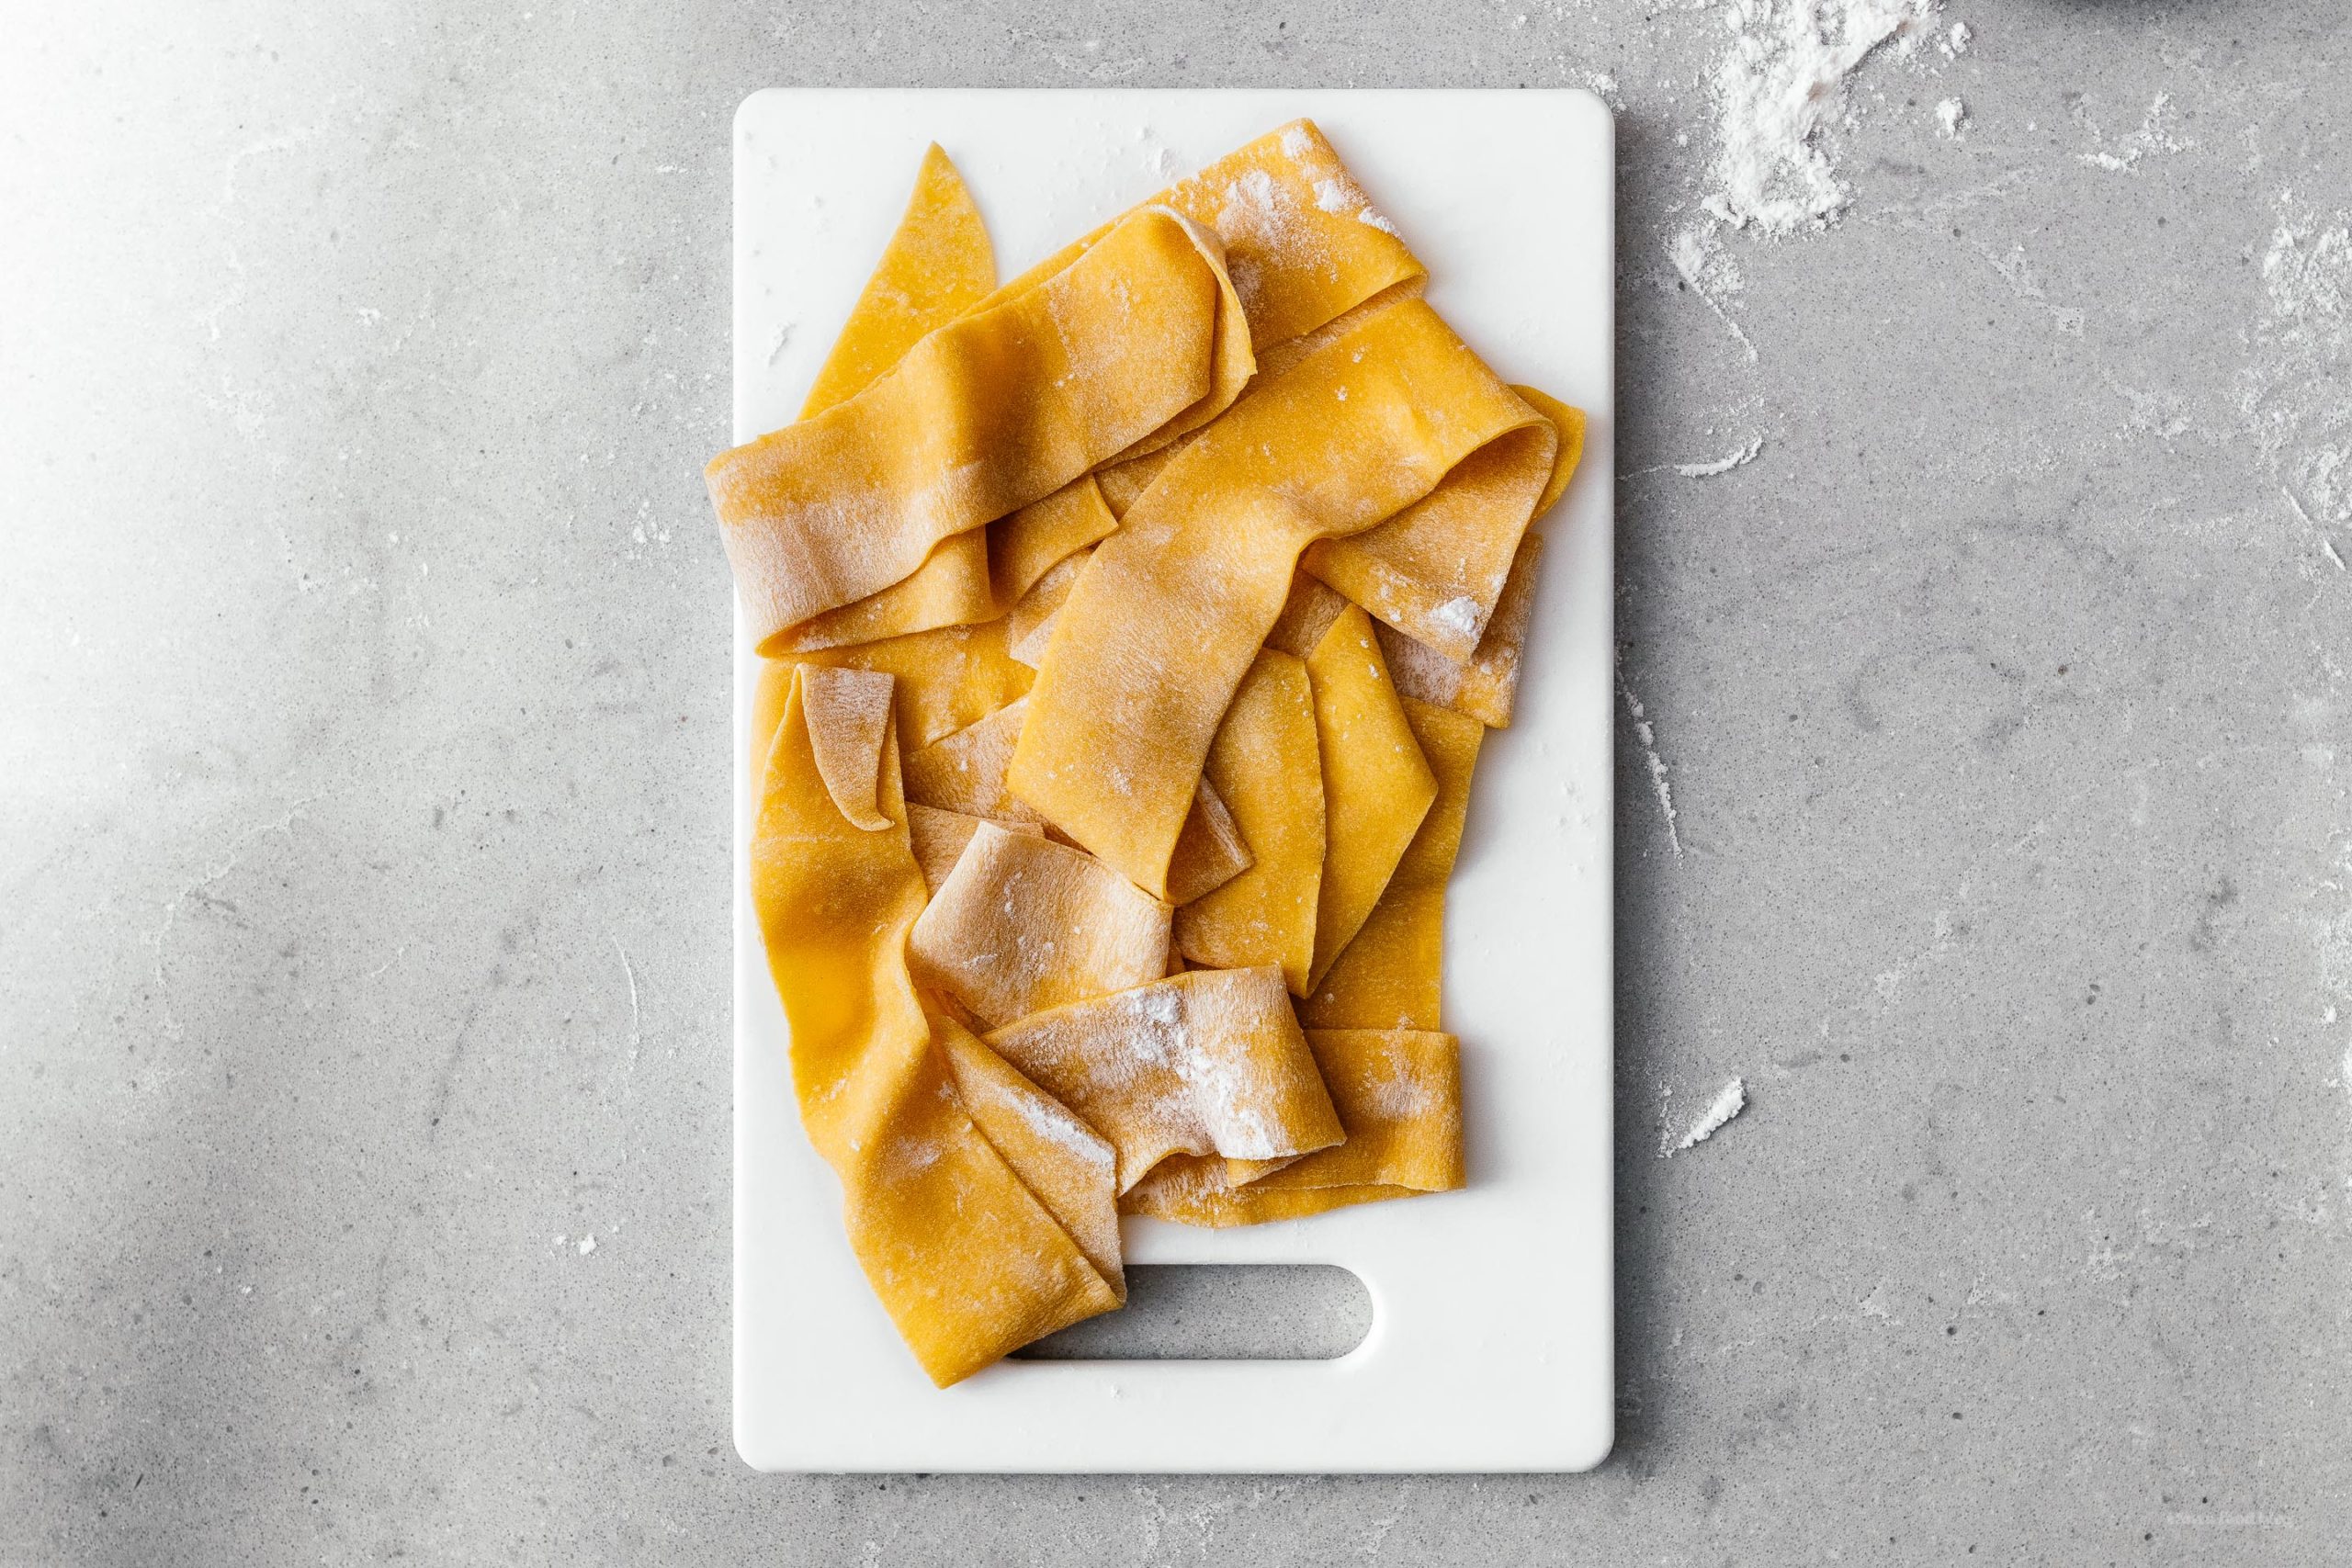 How to make fresh pasta the easy way: our almost no knead pasta recipe